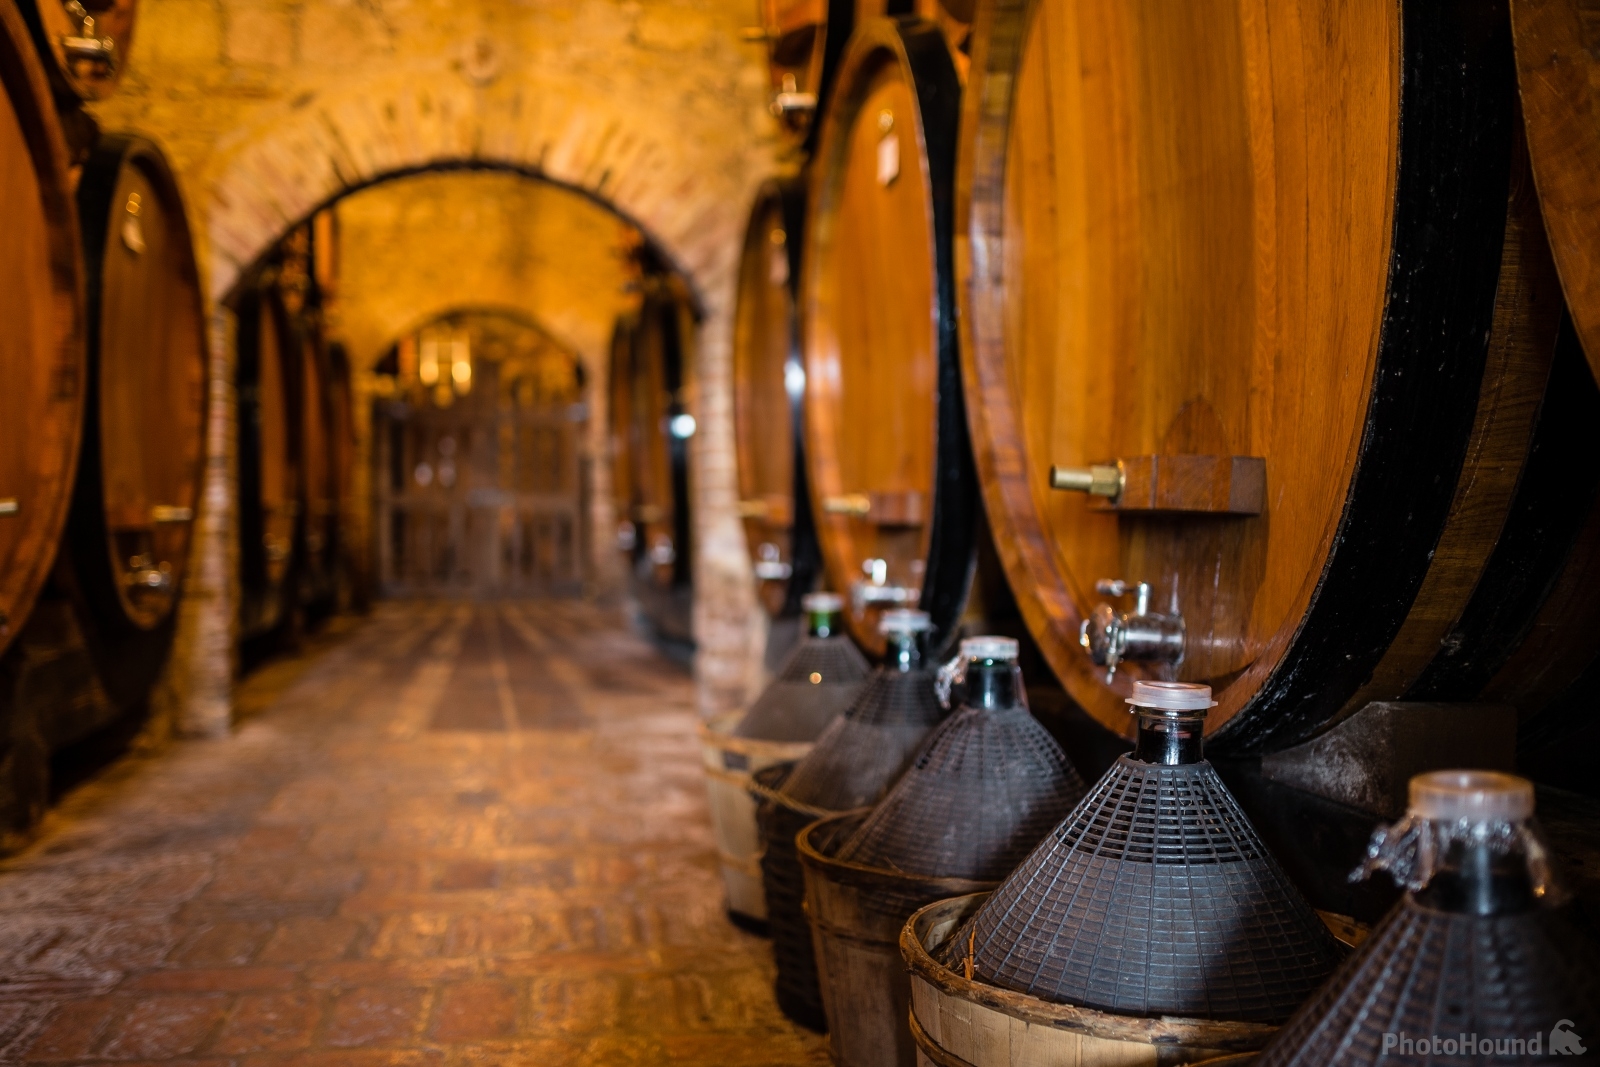 Image of Cantina Contucci Montepulciano wine cellars by VOJTa Herout